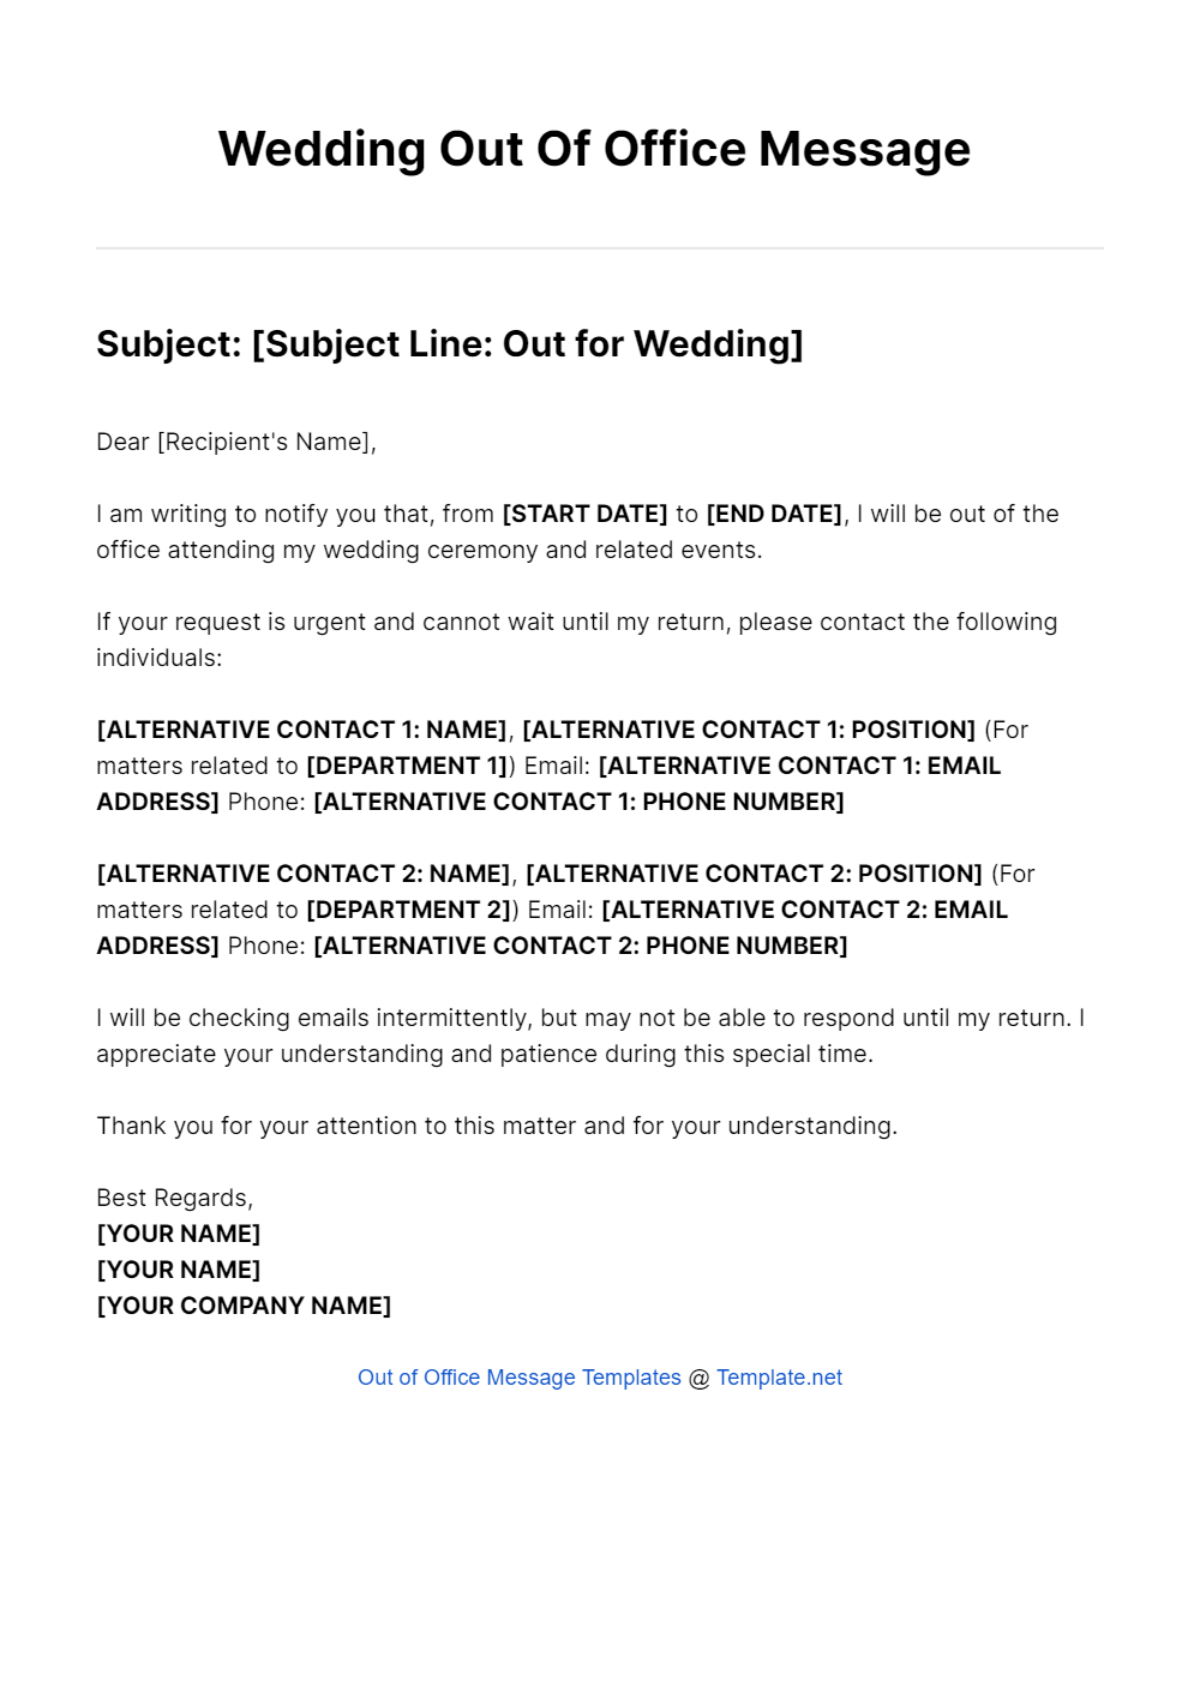 Wedding Out Of Office Message Template